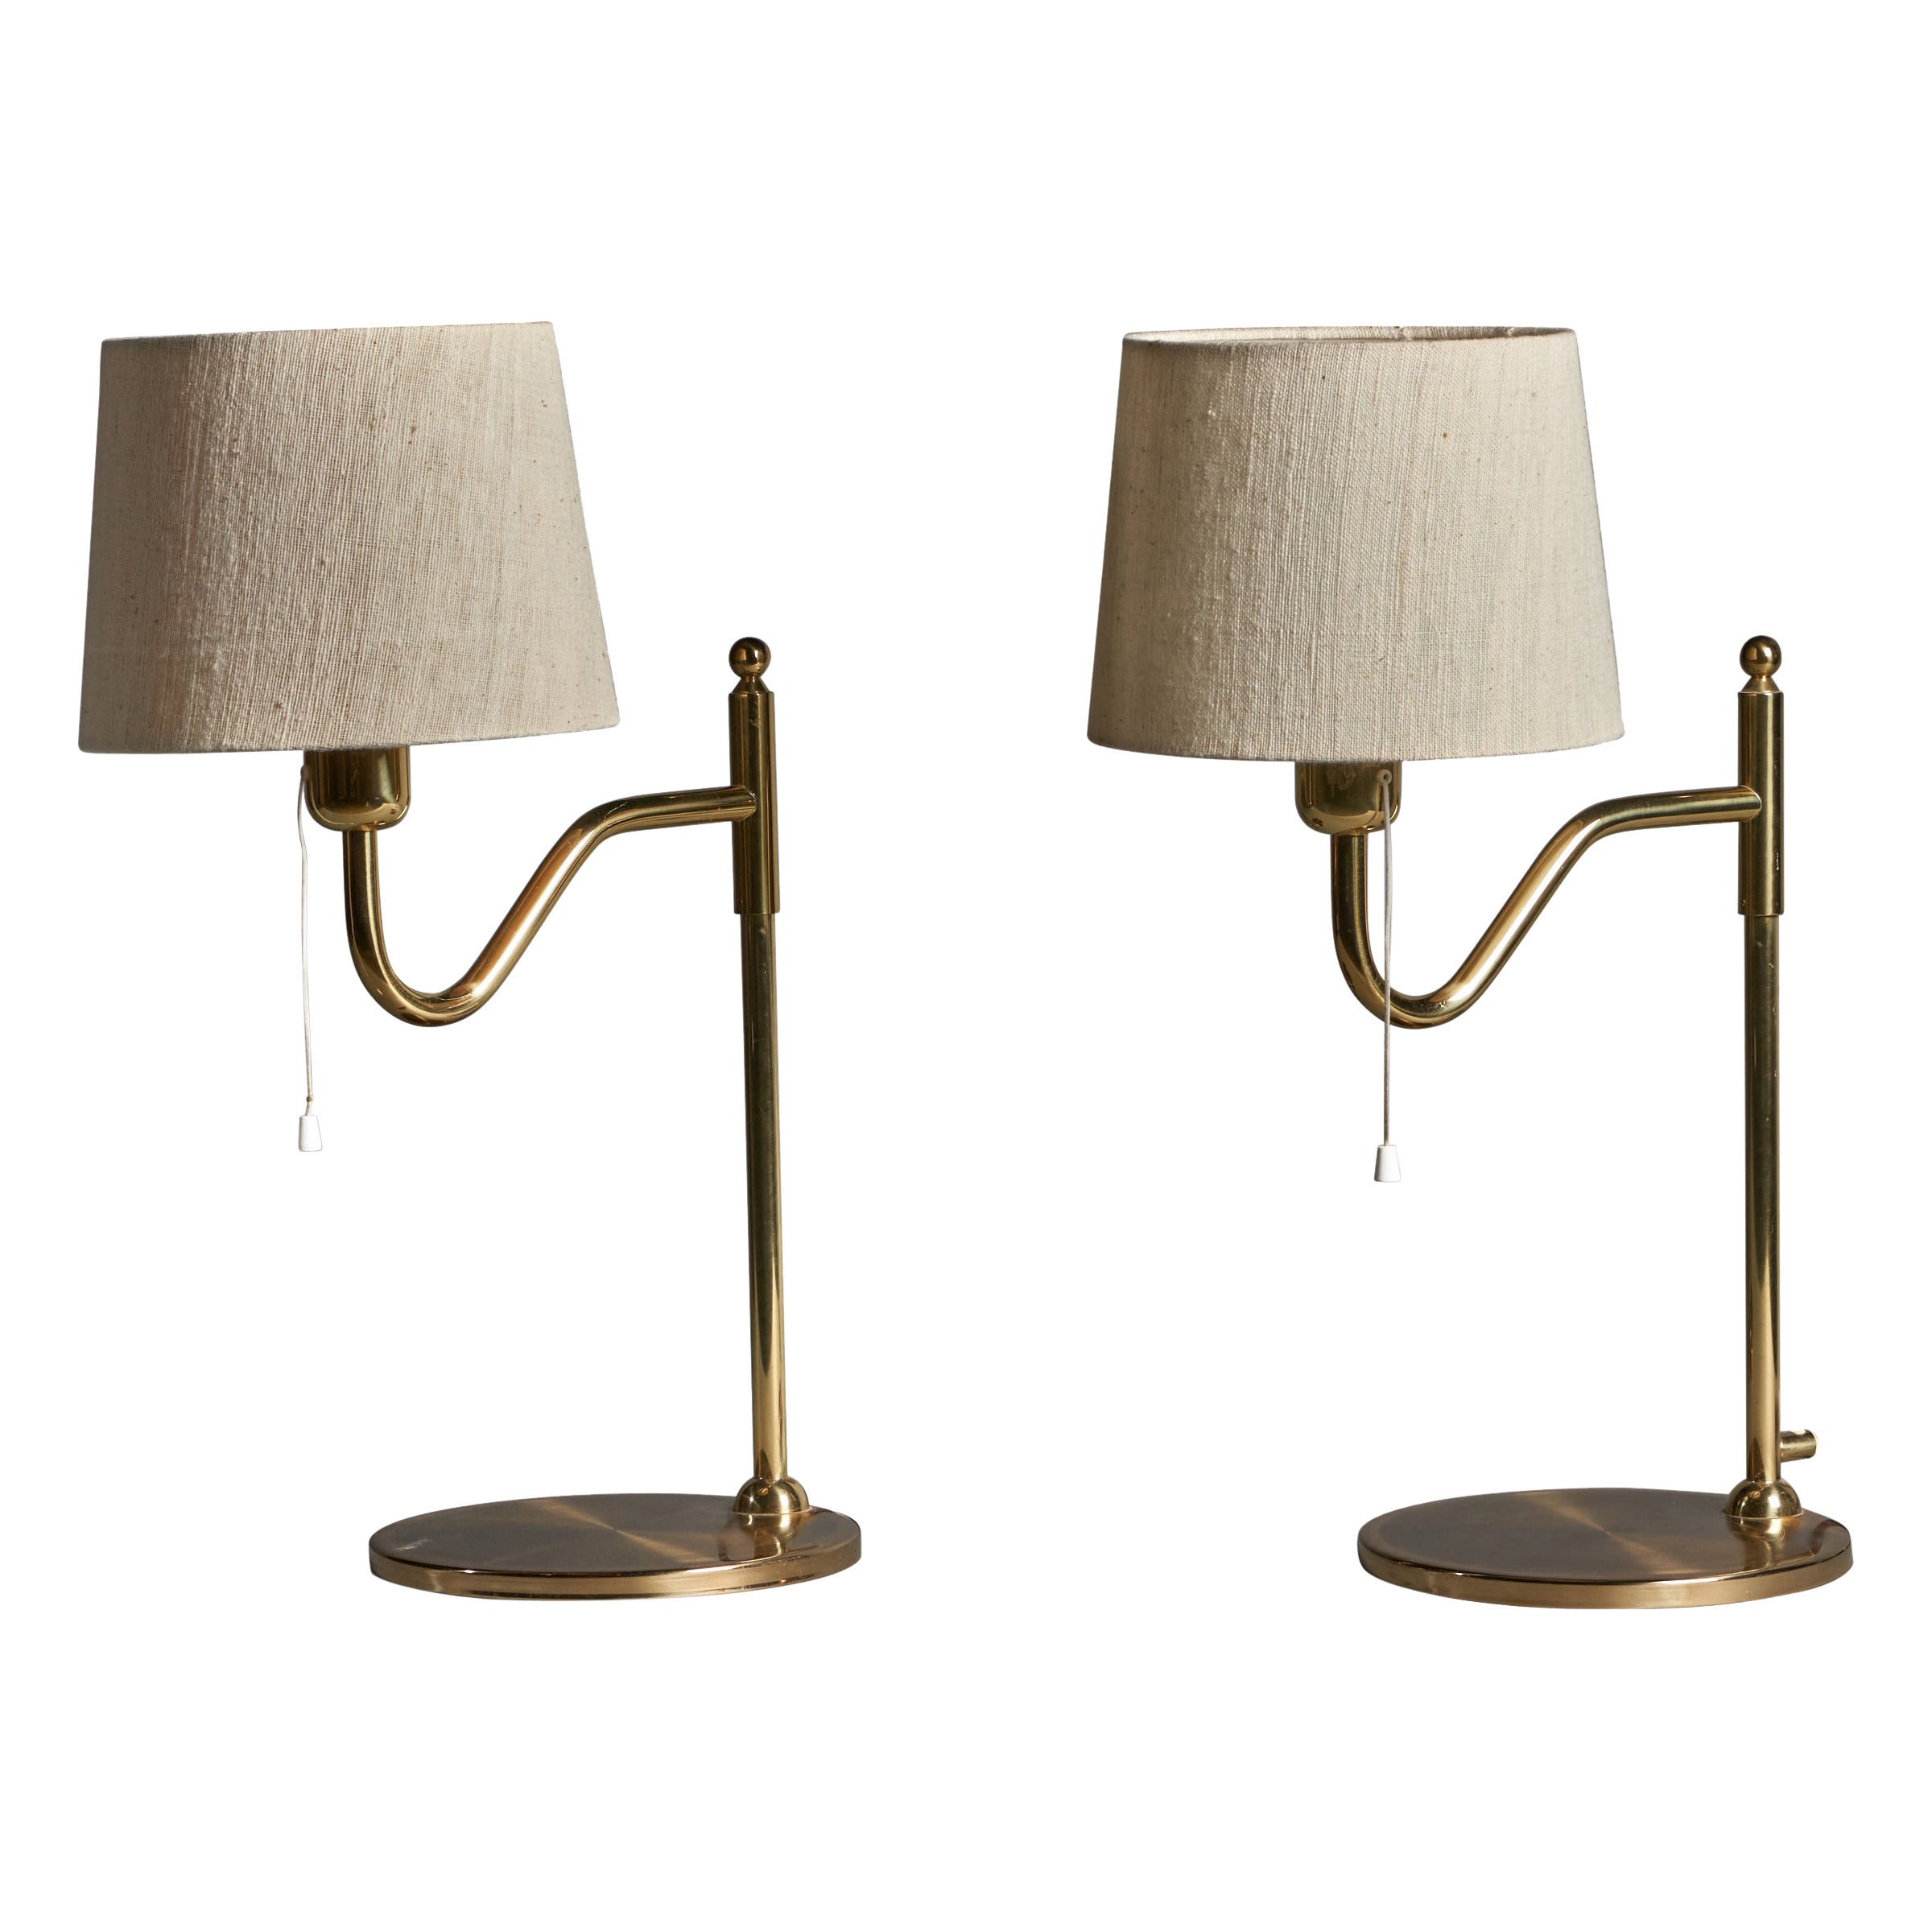 Nya Öia, Table Lamps, Brass, Fabric, Sweden, 1970s